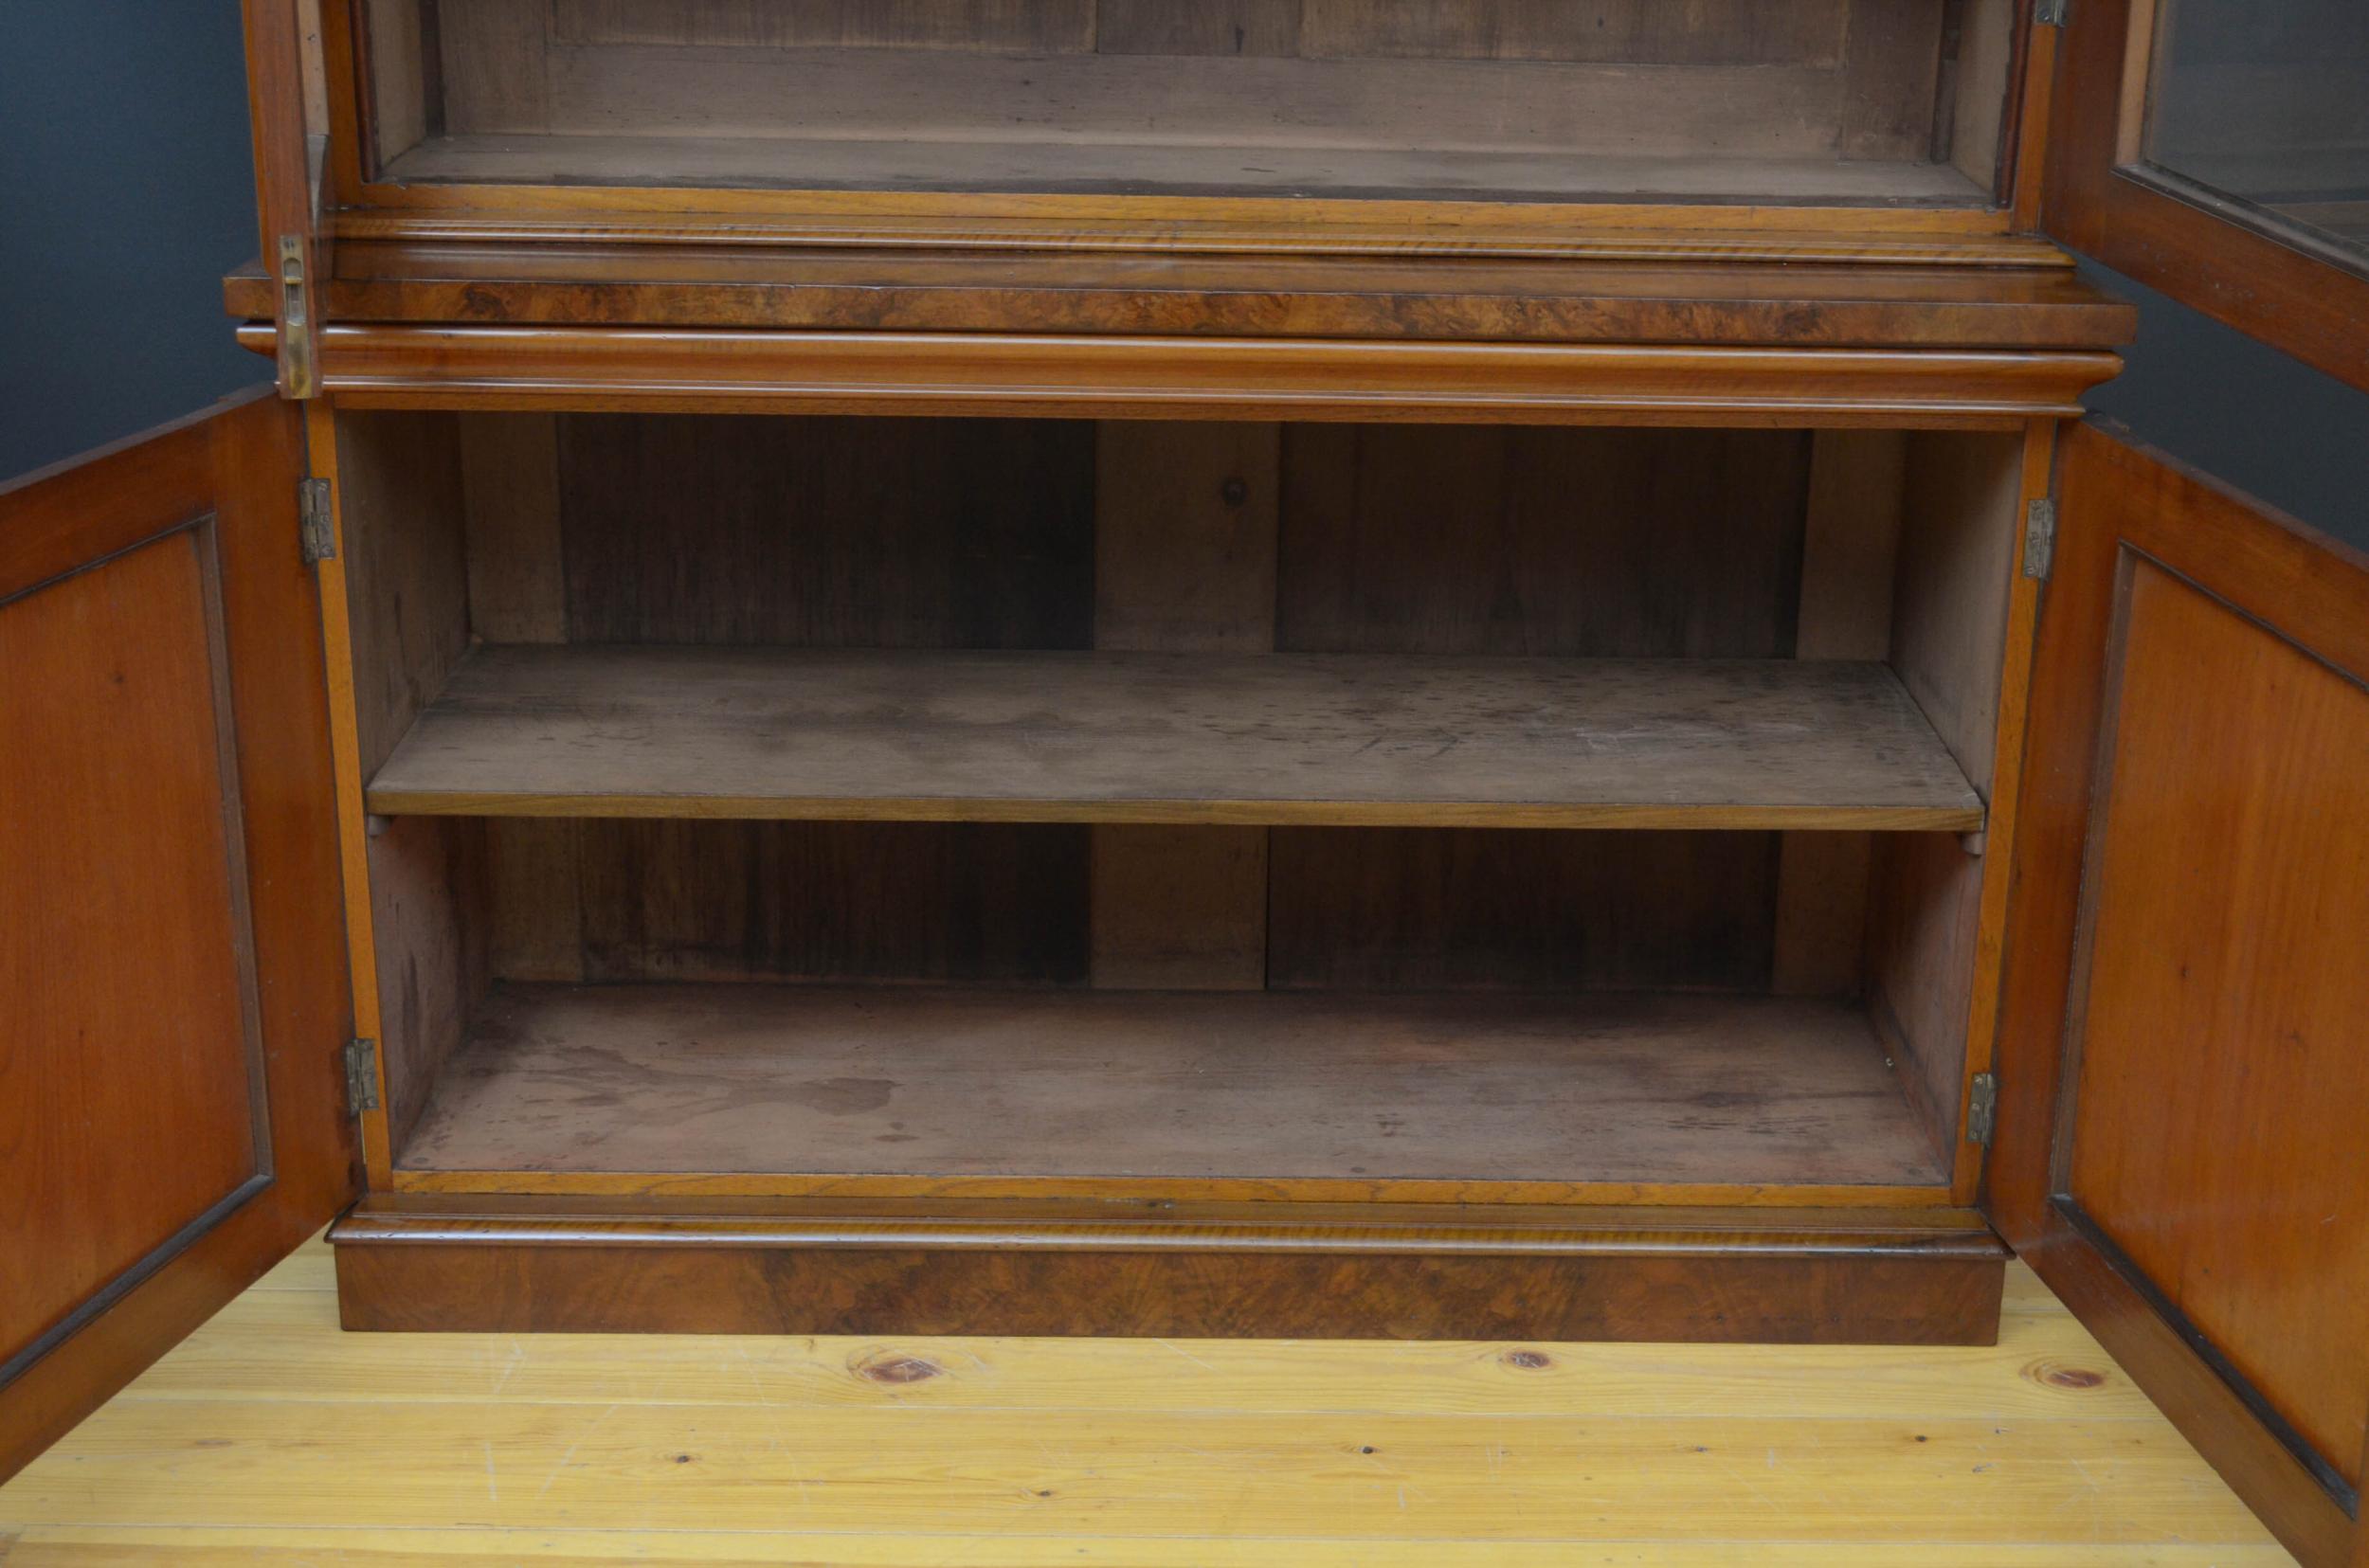 Large Victorian Walnut Library Bookcase 7